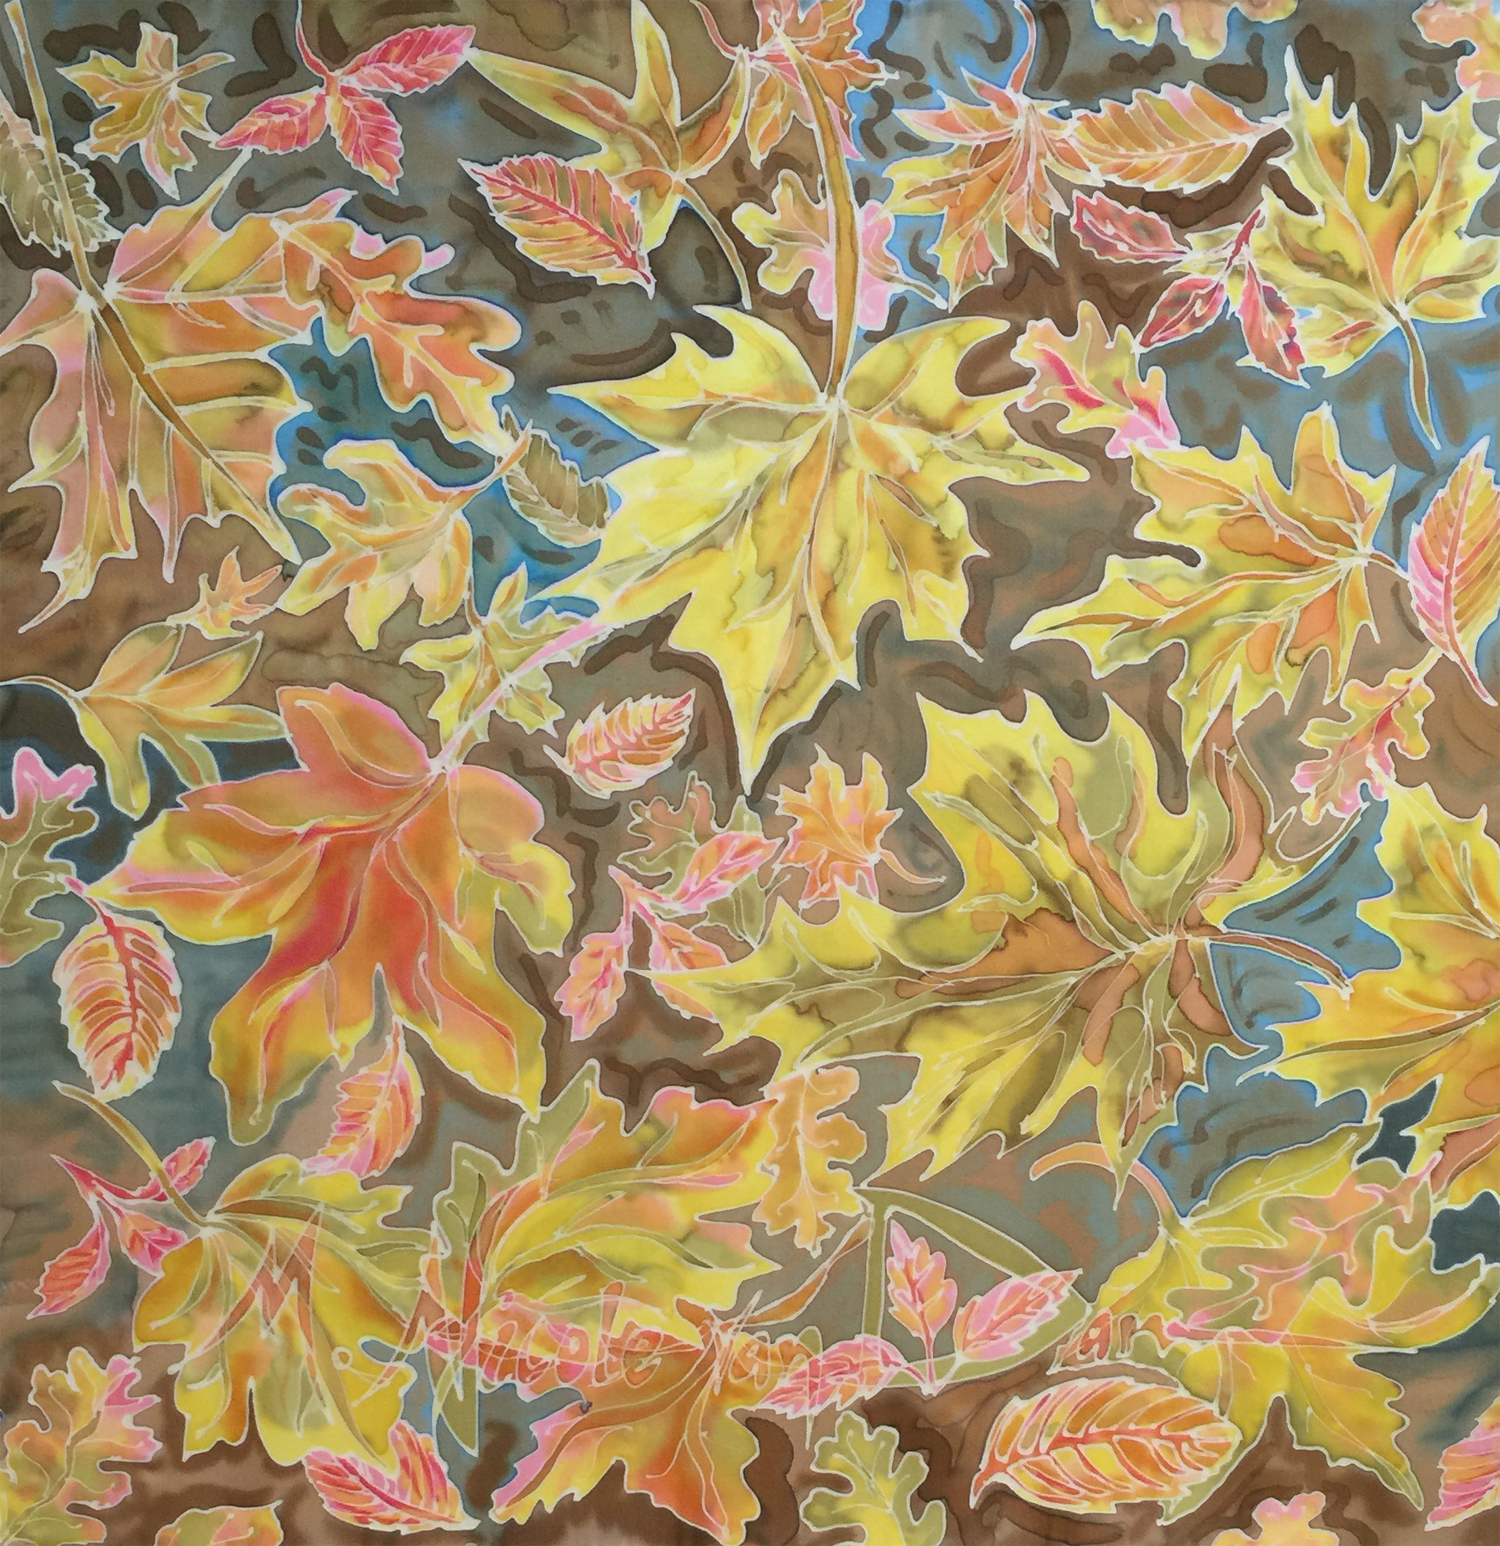 "Dance of the Fall Leaves" Limited Edition Giclee Print 00118